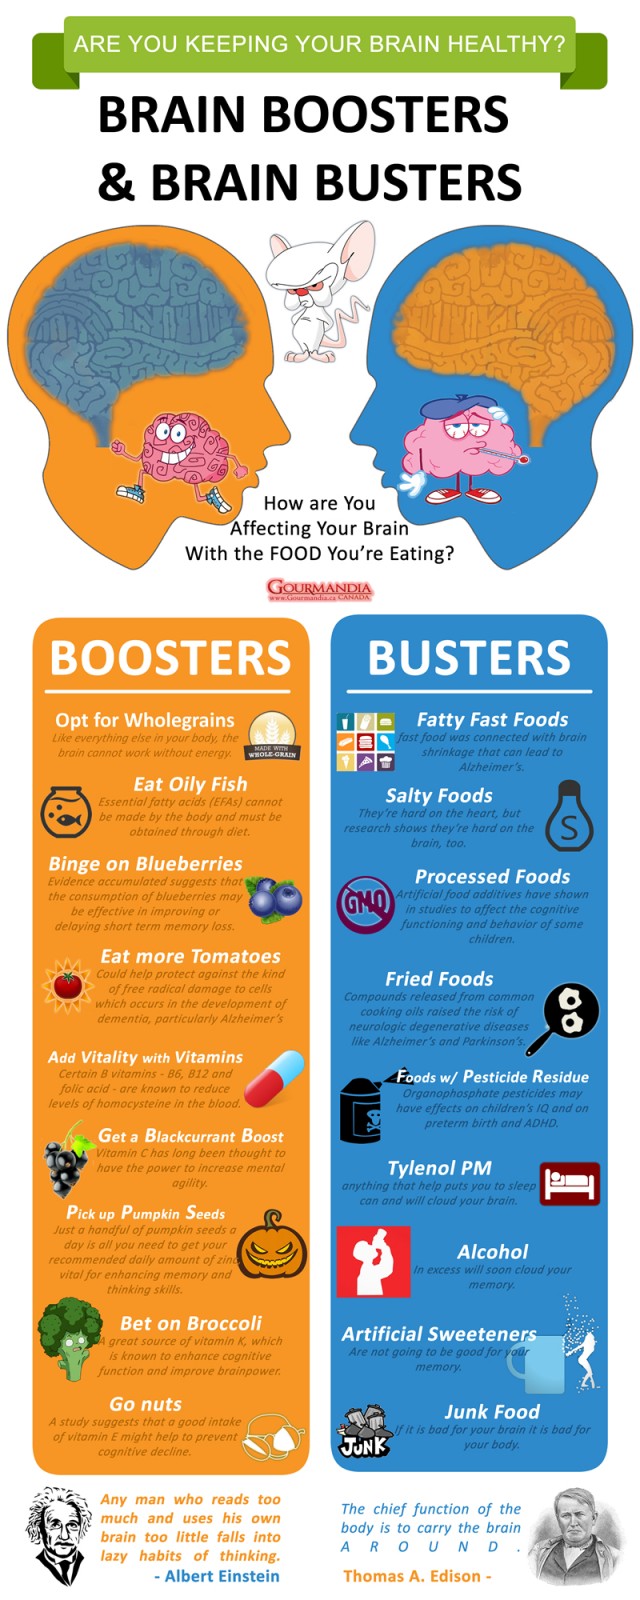 brain-boosters-and-brain-busters_523ac6280e90f-640x1600